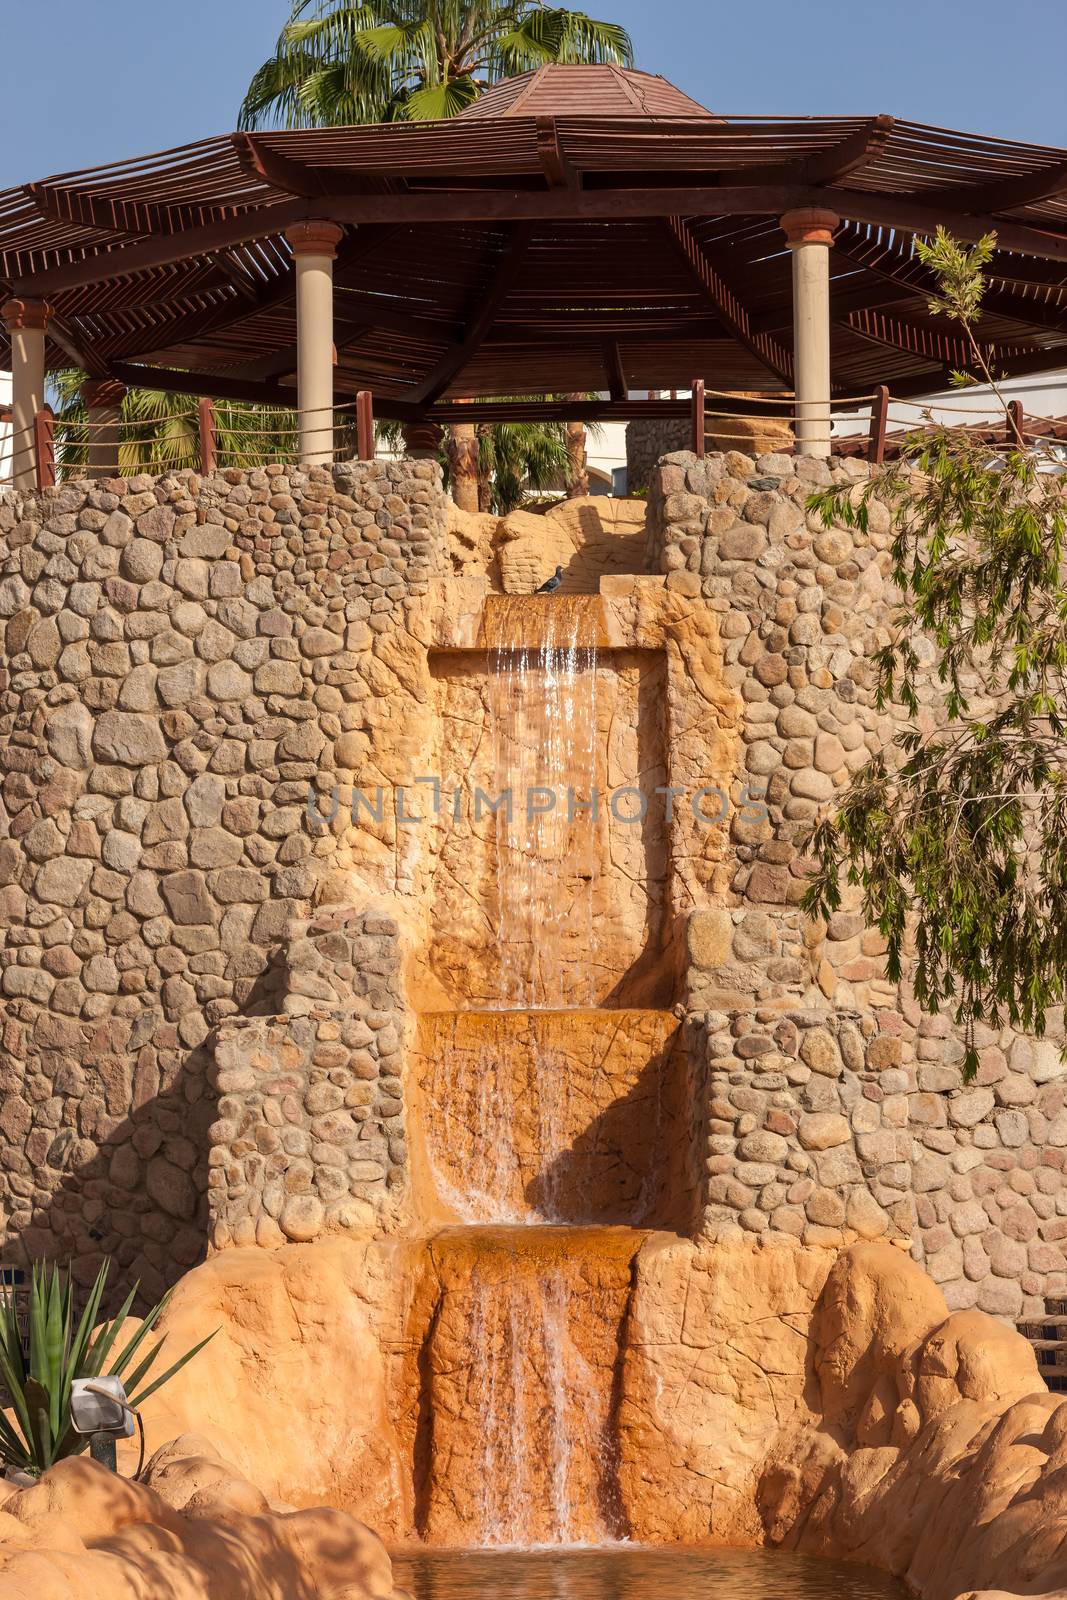  wooden gazebo with a waterfall, Egypt by master1305